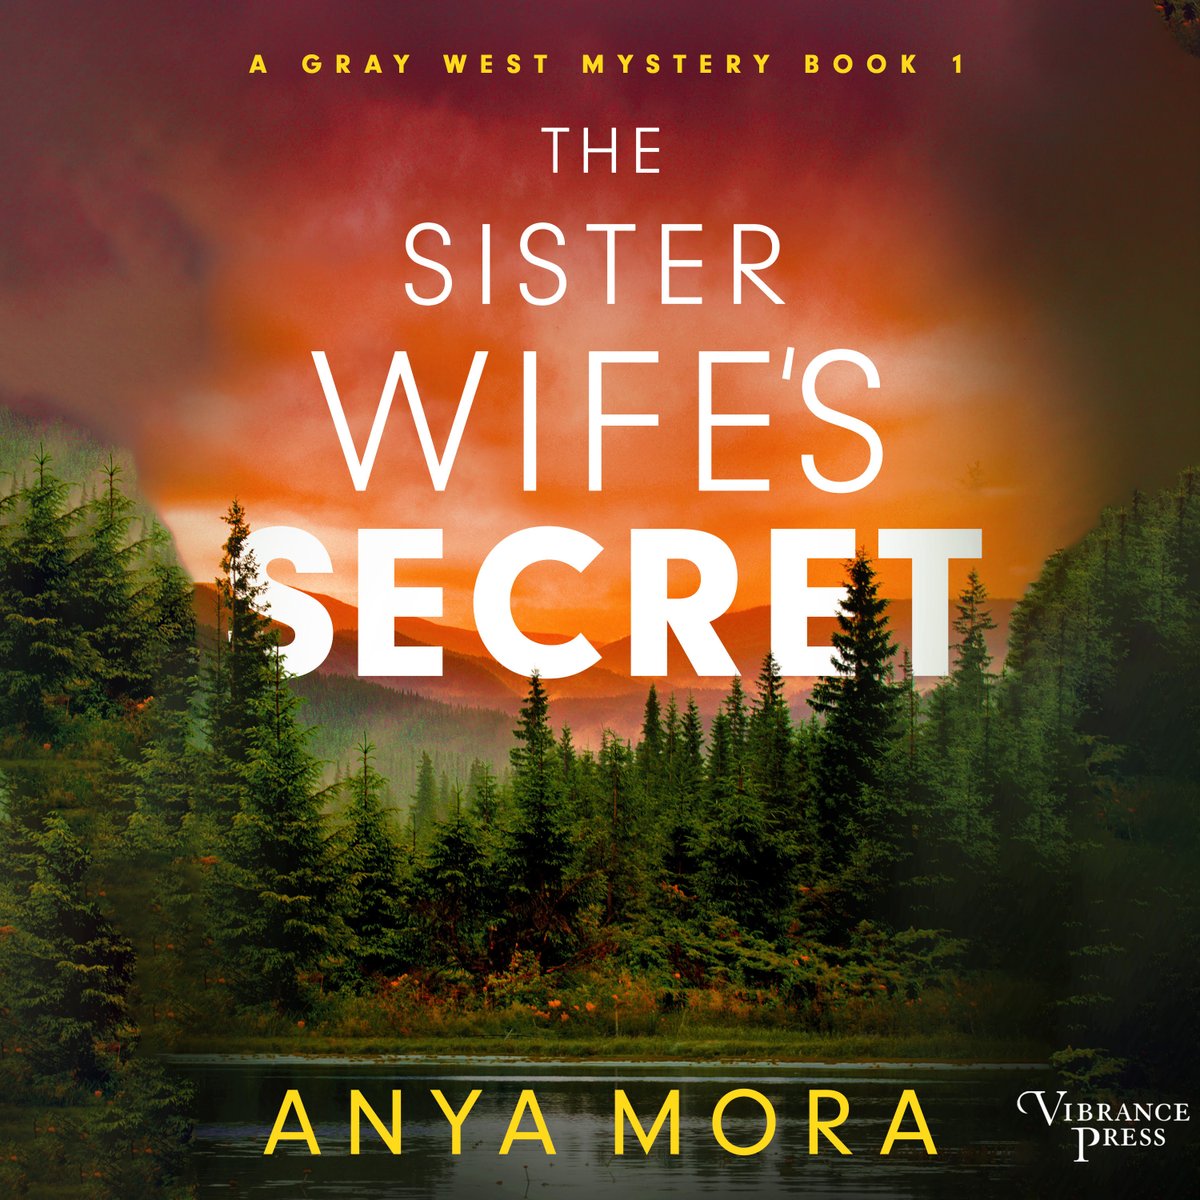 She escaped a cult with her young children. When a close friend is murdered, she knows her ex-husband is on a mission of revenge

THE SISTER WIFE'S SECRET, by Anya Mora, narrated by Subhadra Newton, starts the thrilling Gray West Mystery series

Now in audio from Vibrance Press